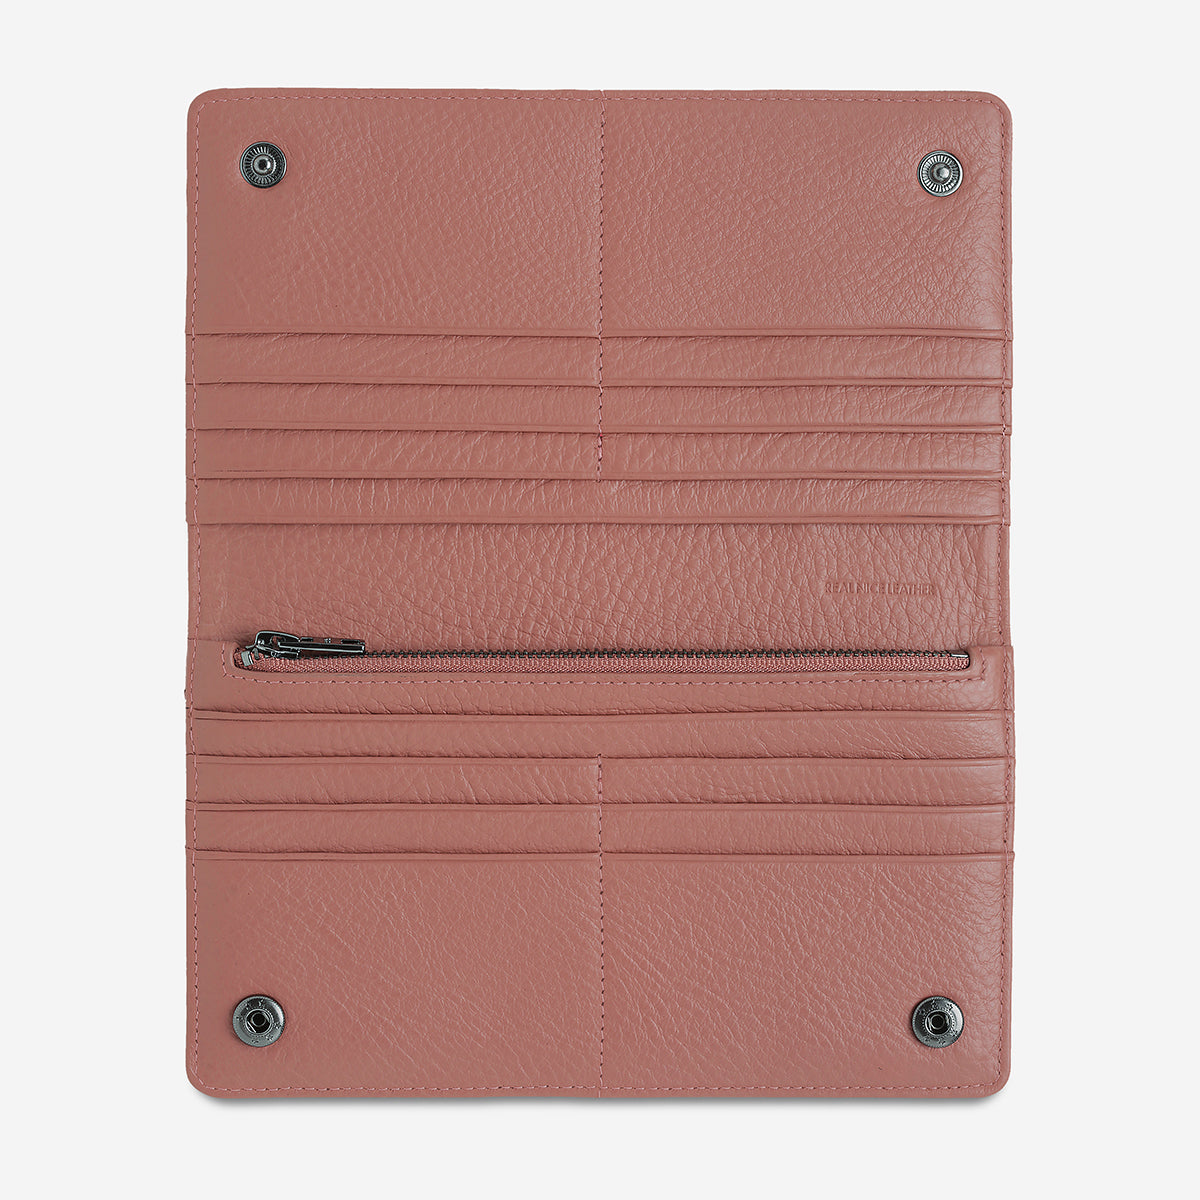 Living Proof Leather Wallet - Dusty Rose